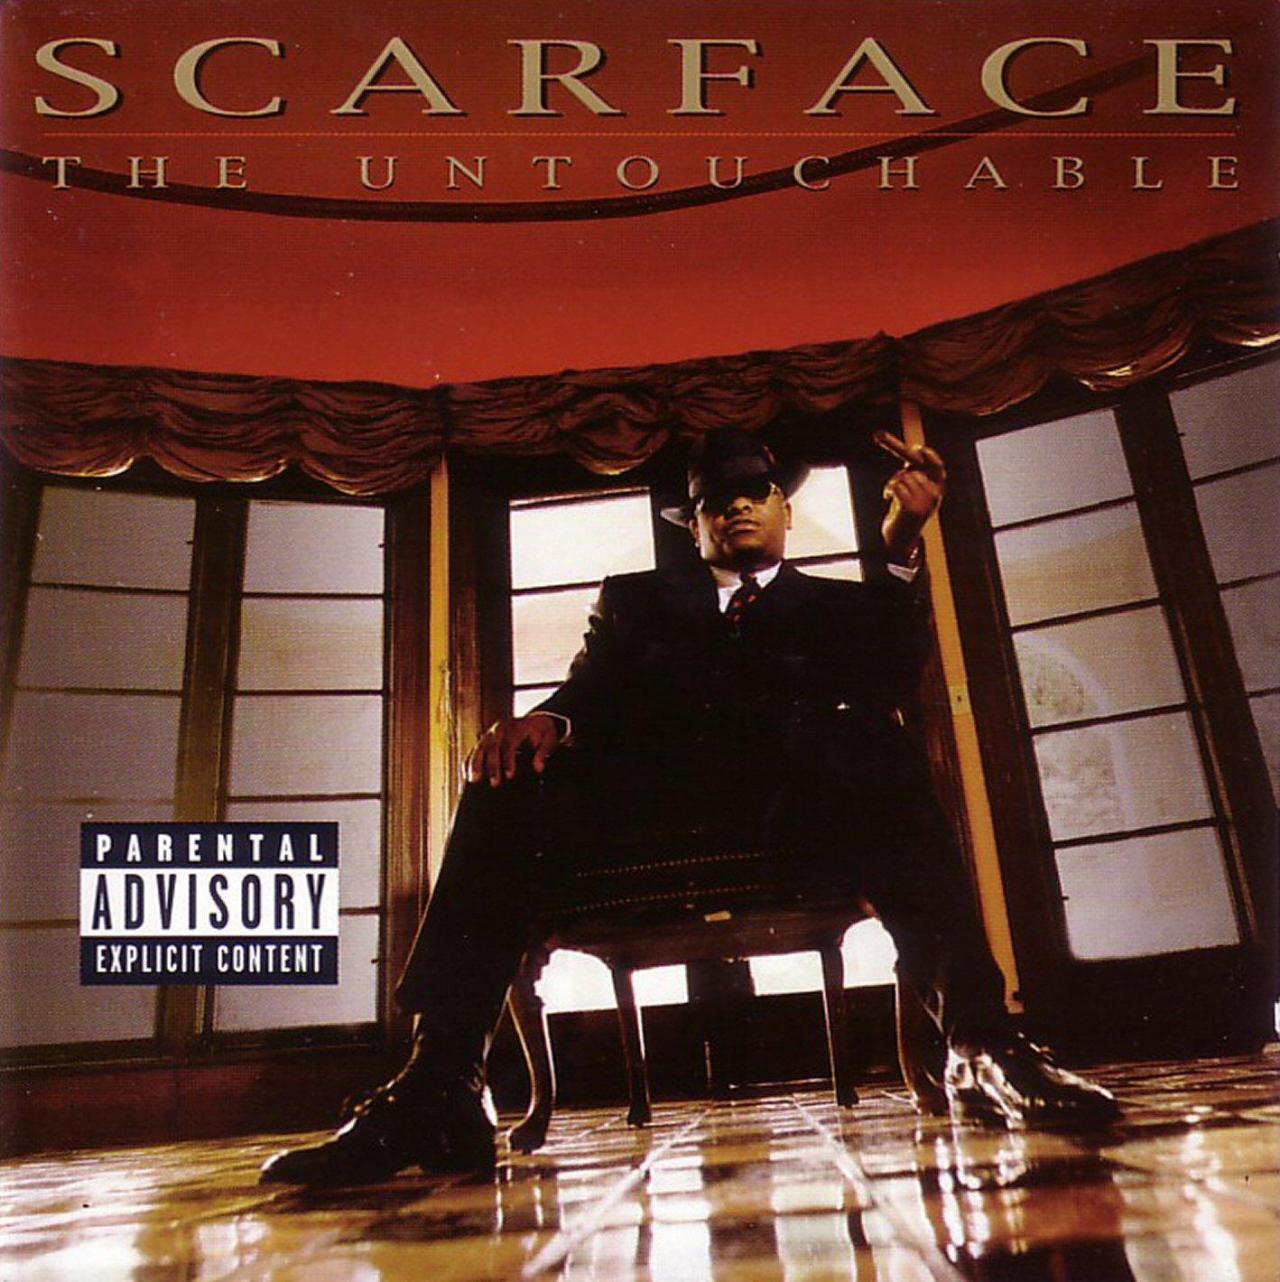 BACK IN THE DAY |3/11/97| Scarface released his fourth album, The Untouchable, on